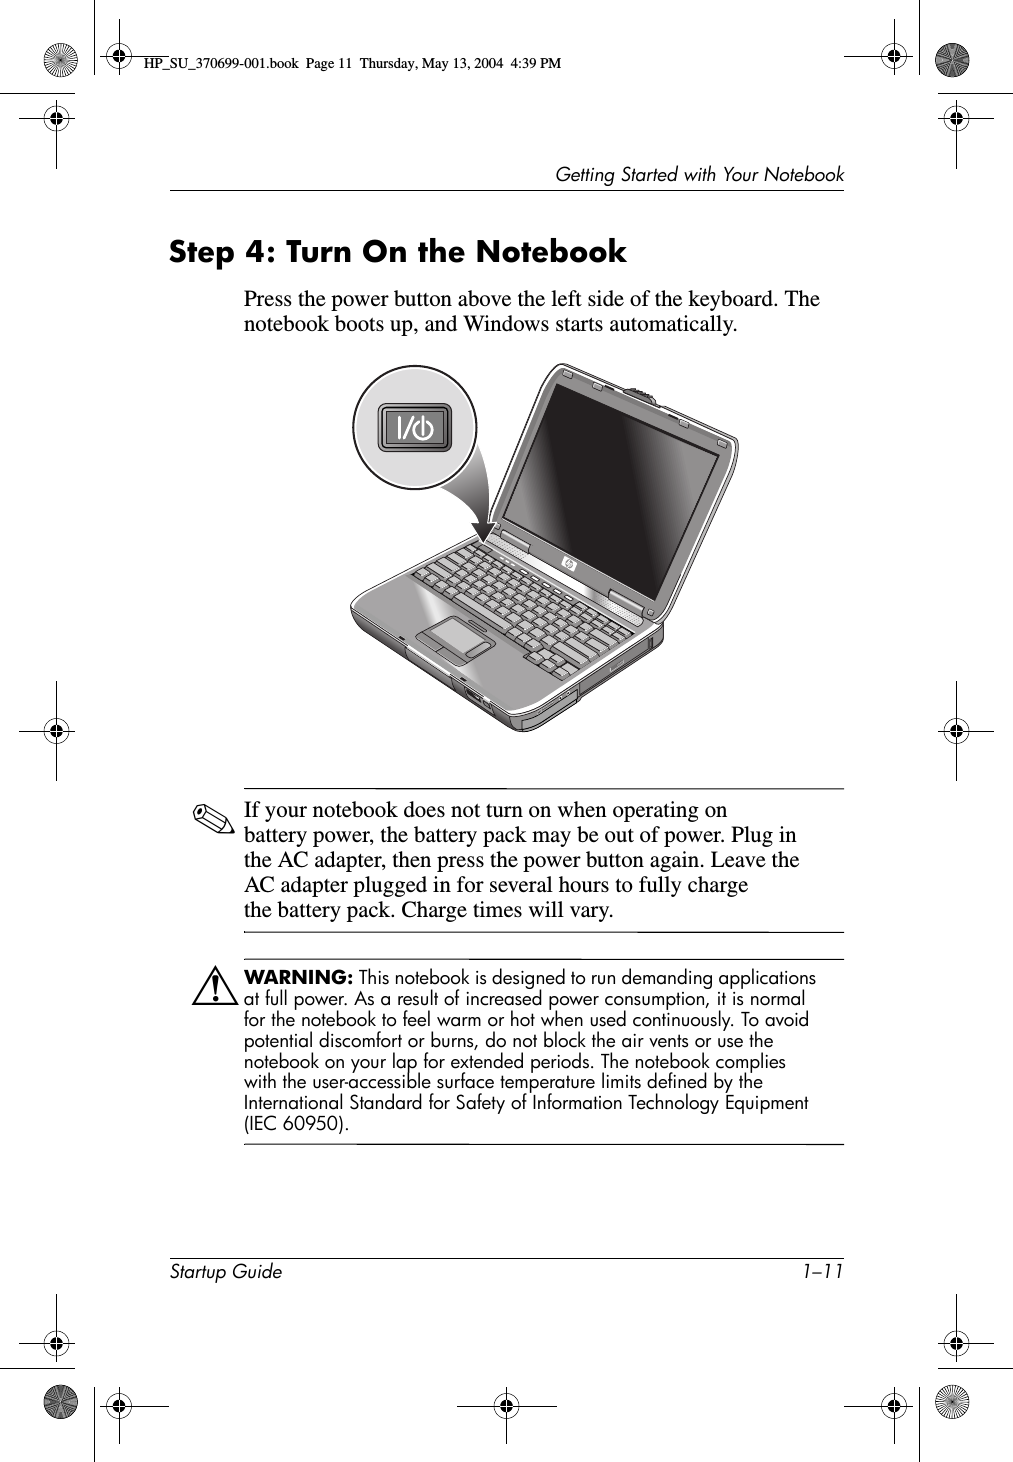 Getting Started with Your NotebookStartup Guide 1–11Step 4: Turn On the NotebookPress the power button above the left side of the keyboard. The notebook boots up, and Windows starts automatically.✎If your notebook does not turn on when operating on battery power, the battery pack may be out of power. Plug in the AC adapter, then press the power button again. Leave the AC adapter plugged in for several hours to fully charge the battery pack. Charge times will vary.ÅWARNING: This notebook is designed to run demanding applications at full power. As a result of increased power consumption, it is normal for the notebook to feel warm or hot when used continuously. To avoid potential discomfort or burns, do not block the air vents or use the notebook on your lap for extended periods. The notebook complies with the user-accessible surface temperature limits defined by the International Standard for Safety of Information Technology Equipment (IEC 60950).HP_SU_370699-001.book  Page 11  Thursday, May 13, 2004  4:39 PM